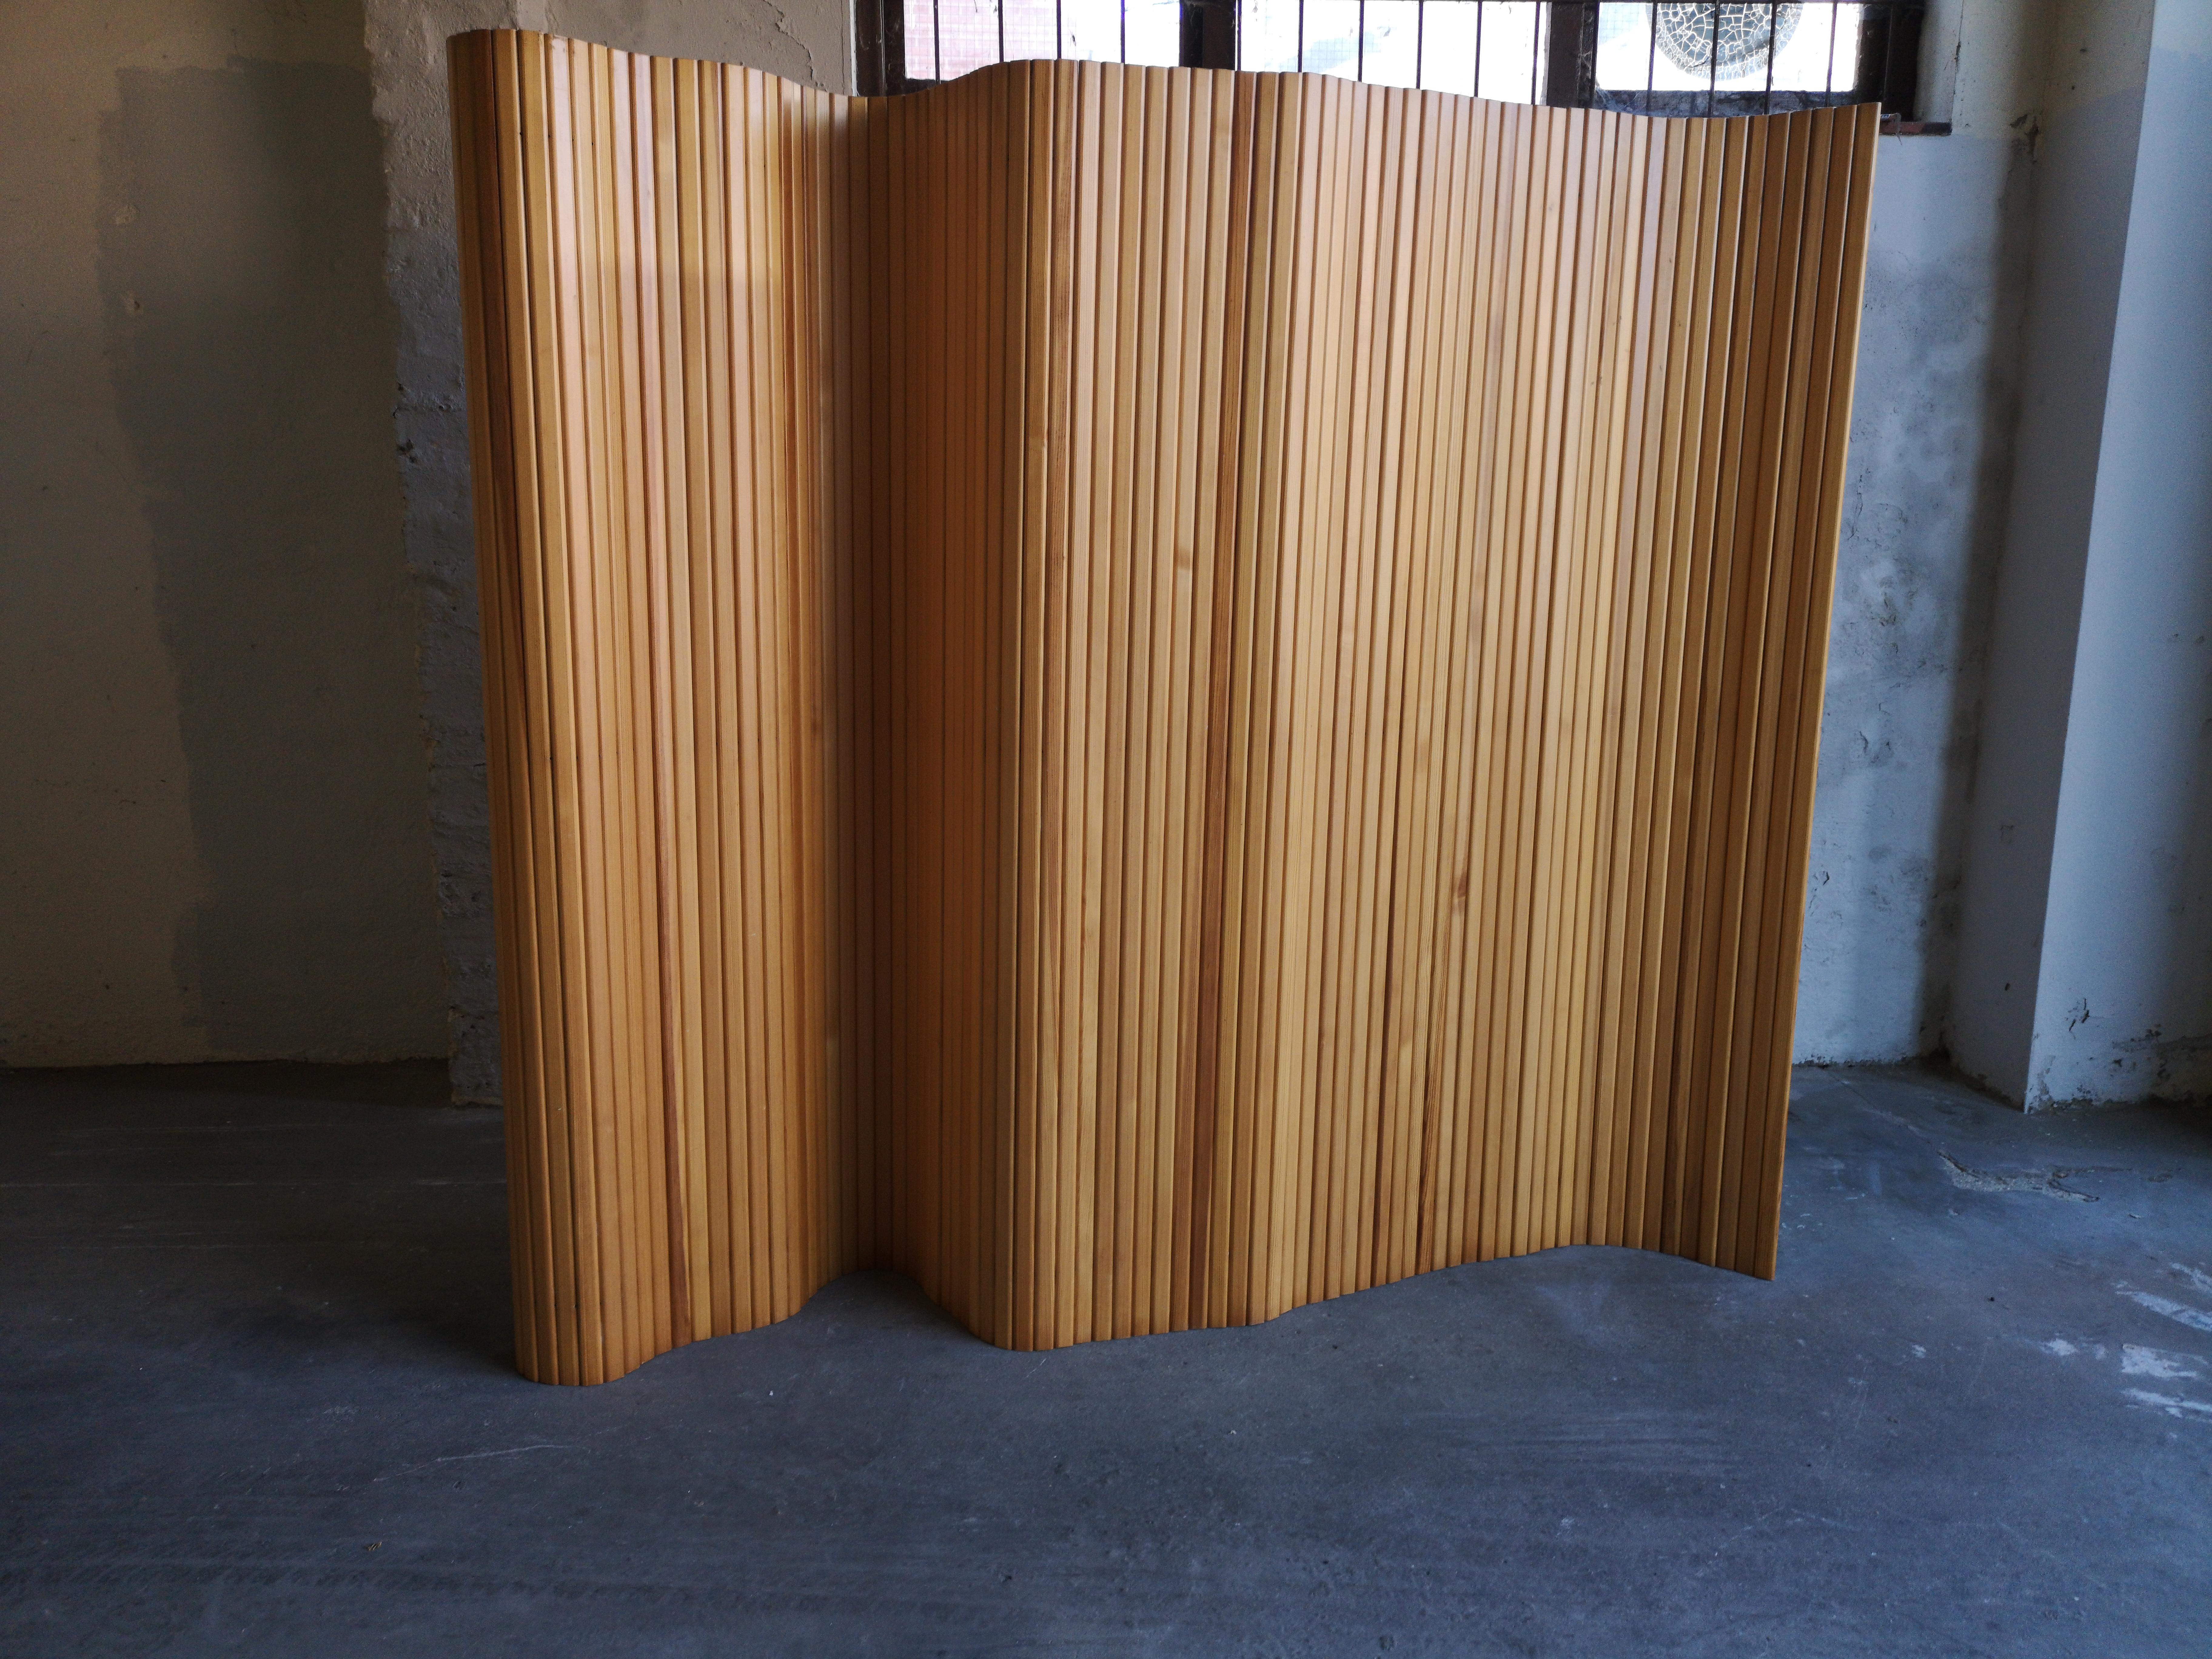 Iconic pinewood room divider designed by Alvar Aalto in the 1930s. The screen can be rolled up and shaped in various positions. Minor signs of use.